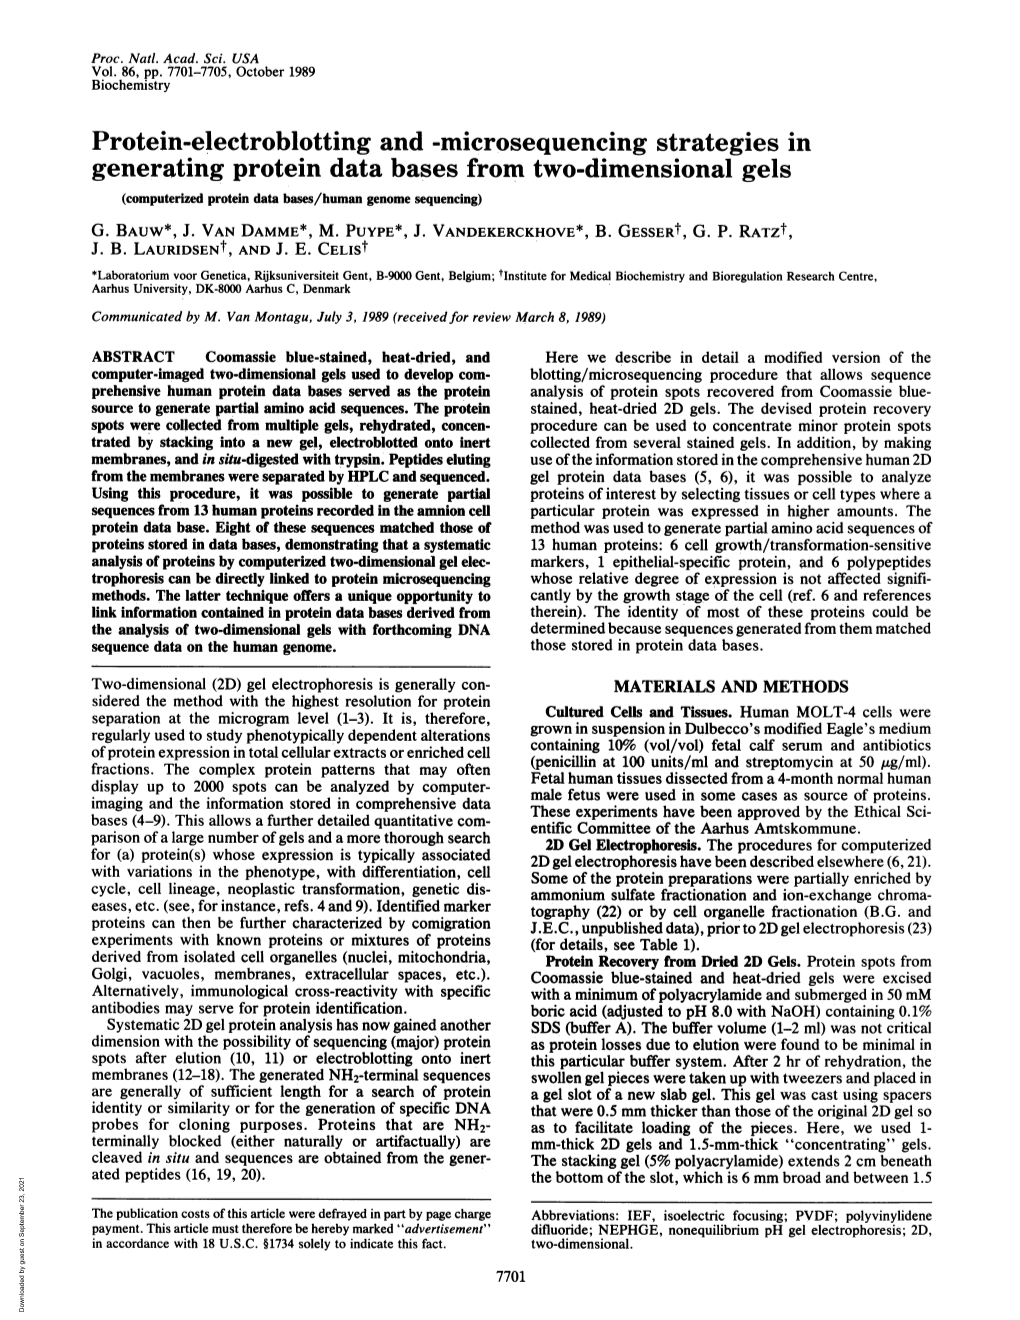 Protein-Electroblotting and -Microsequencing Strategies In